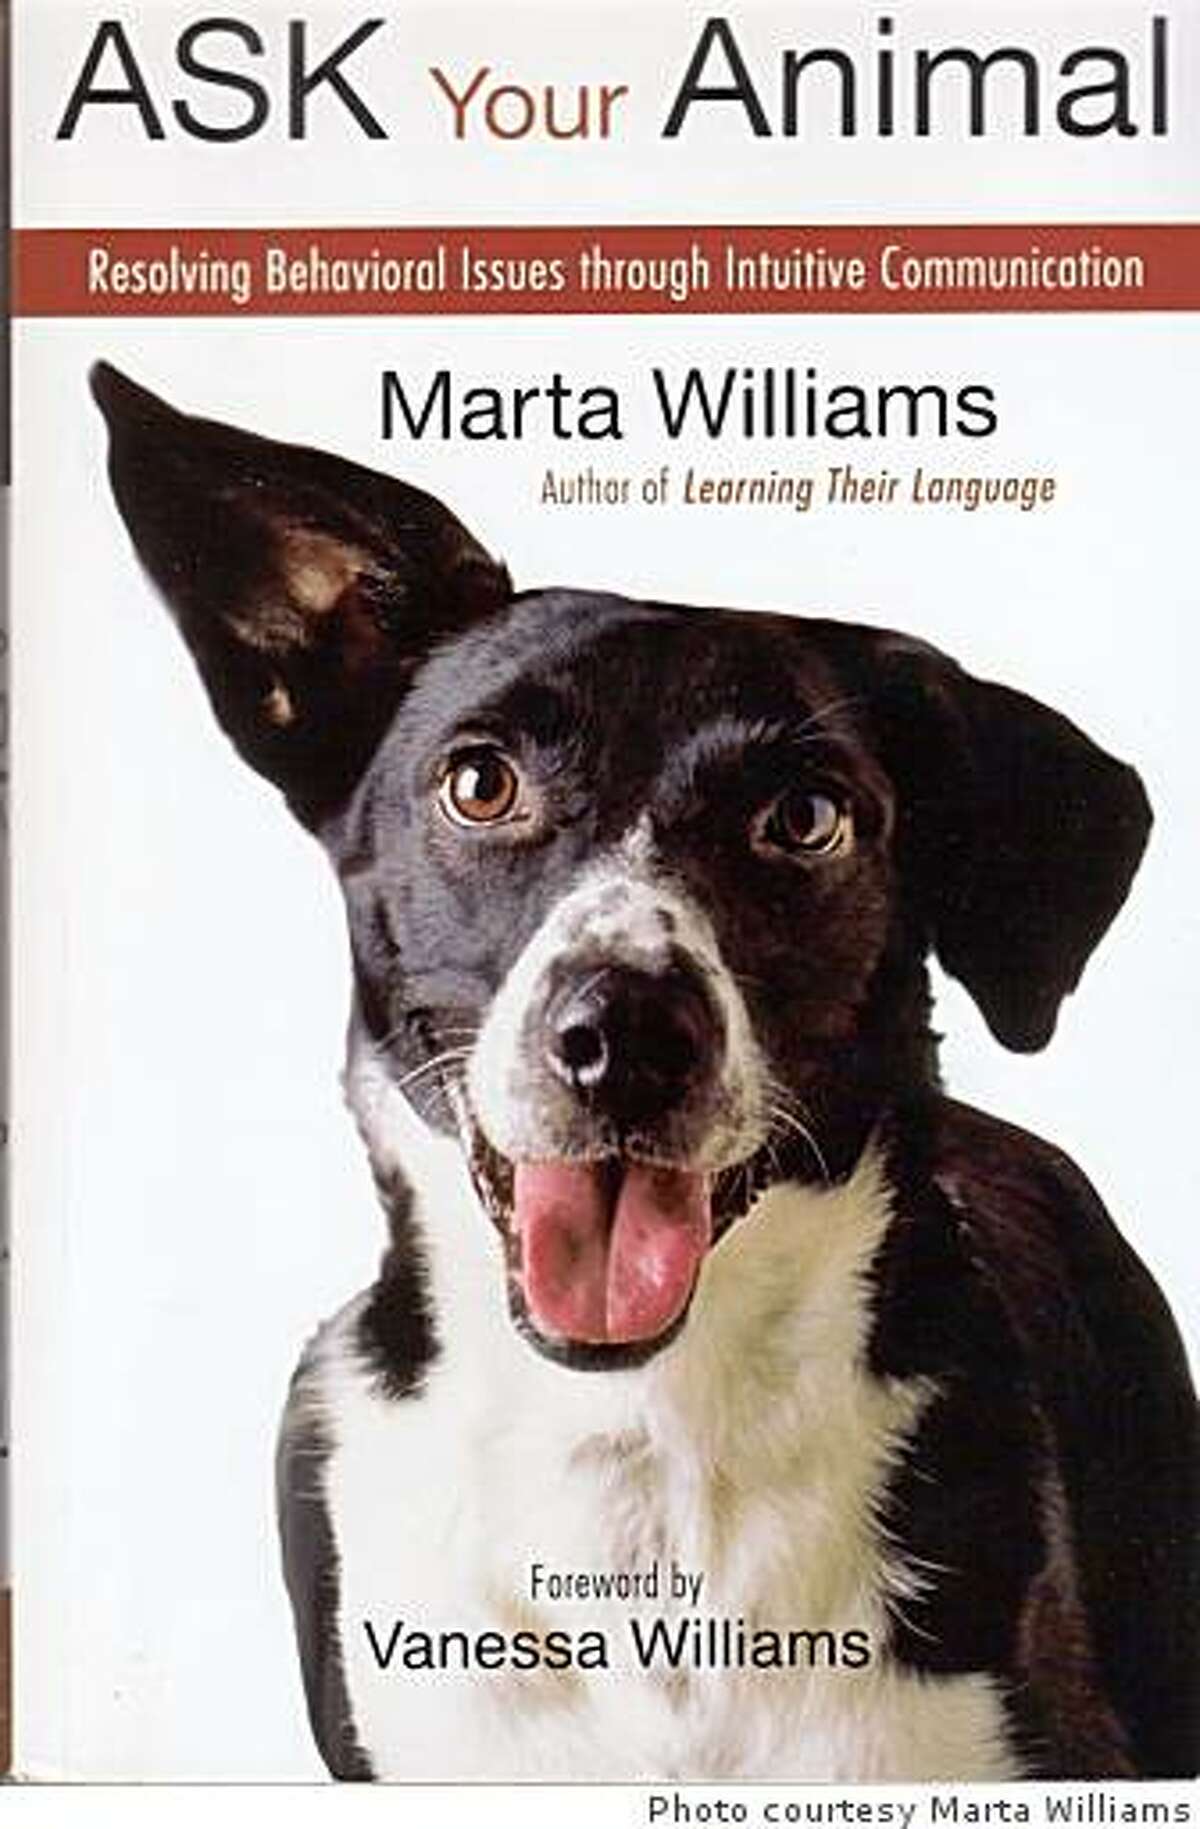 "Ask Your Animal: Resolving behavioral issues through intuitive communication" is animal communicator Marta Williams' latest book. It contains a number of exercises that can be helpful in coping with pet problems, whether you believe in animal communication or not.